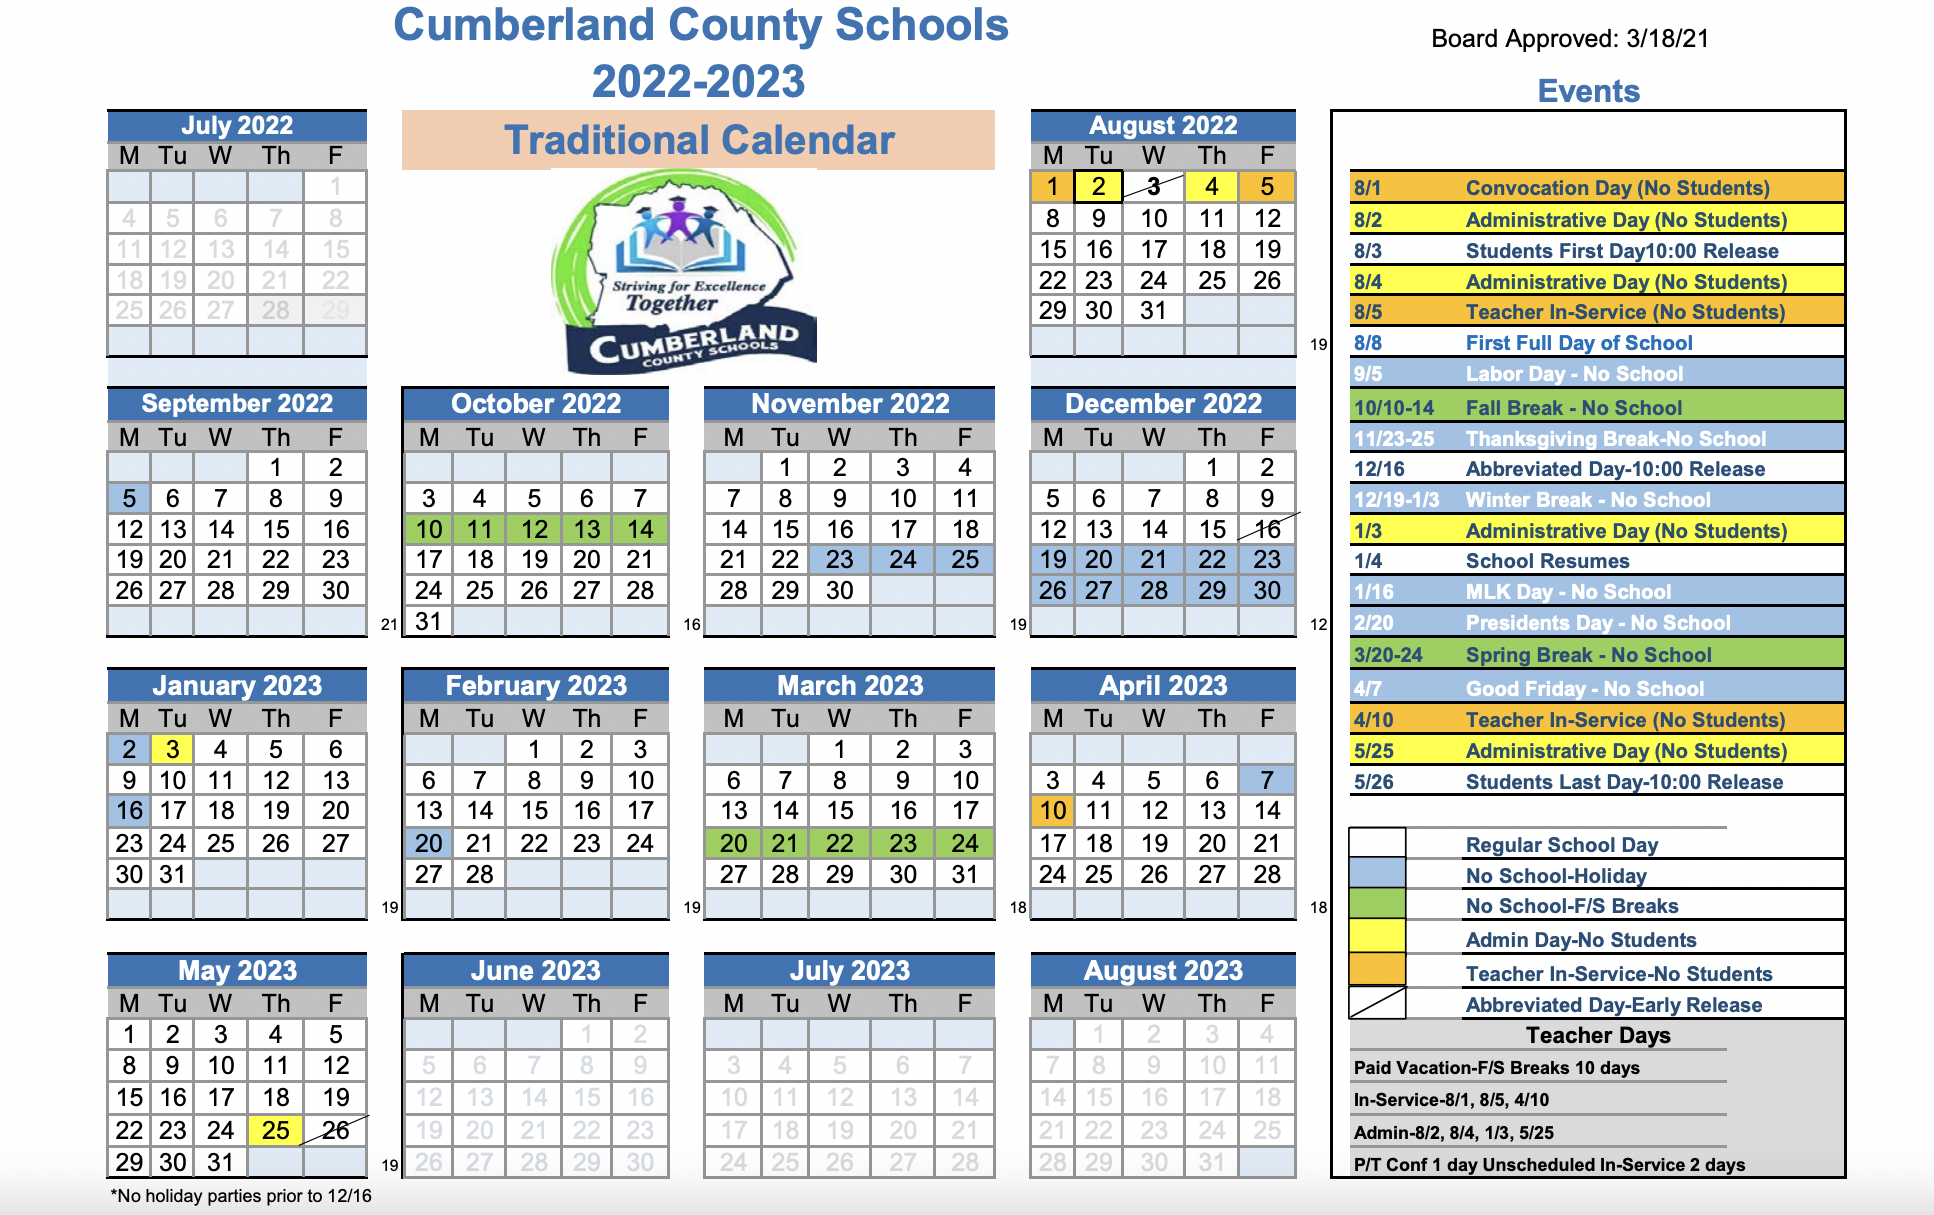 This is the 2022-2023 school calendar.